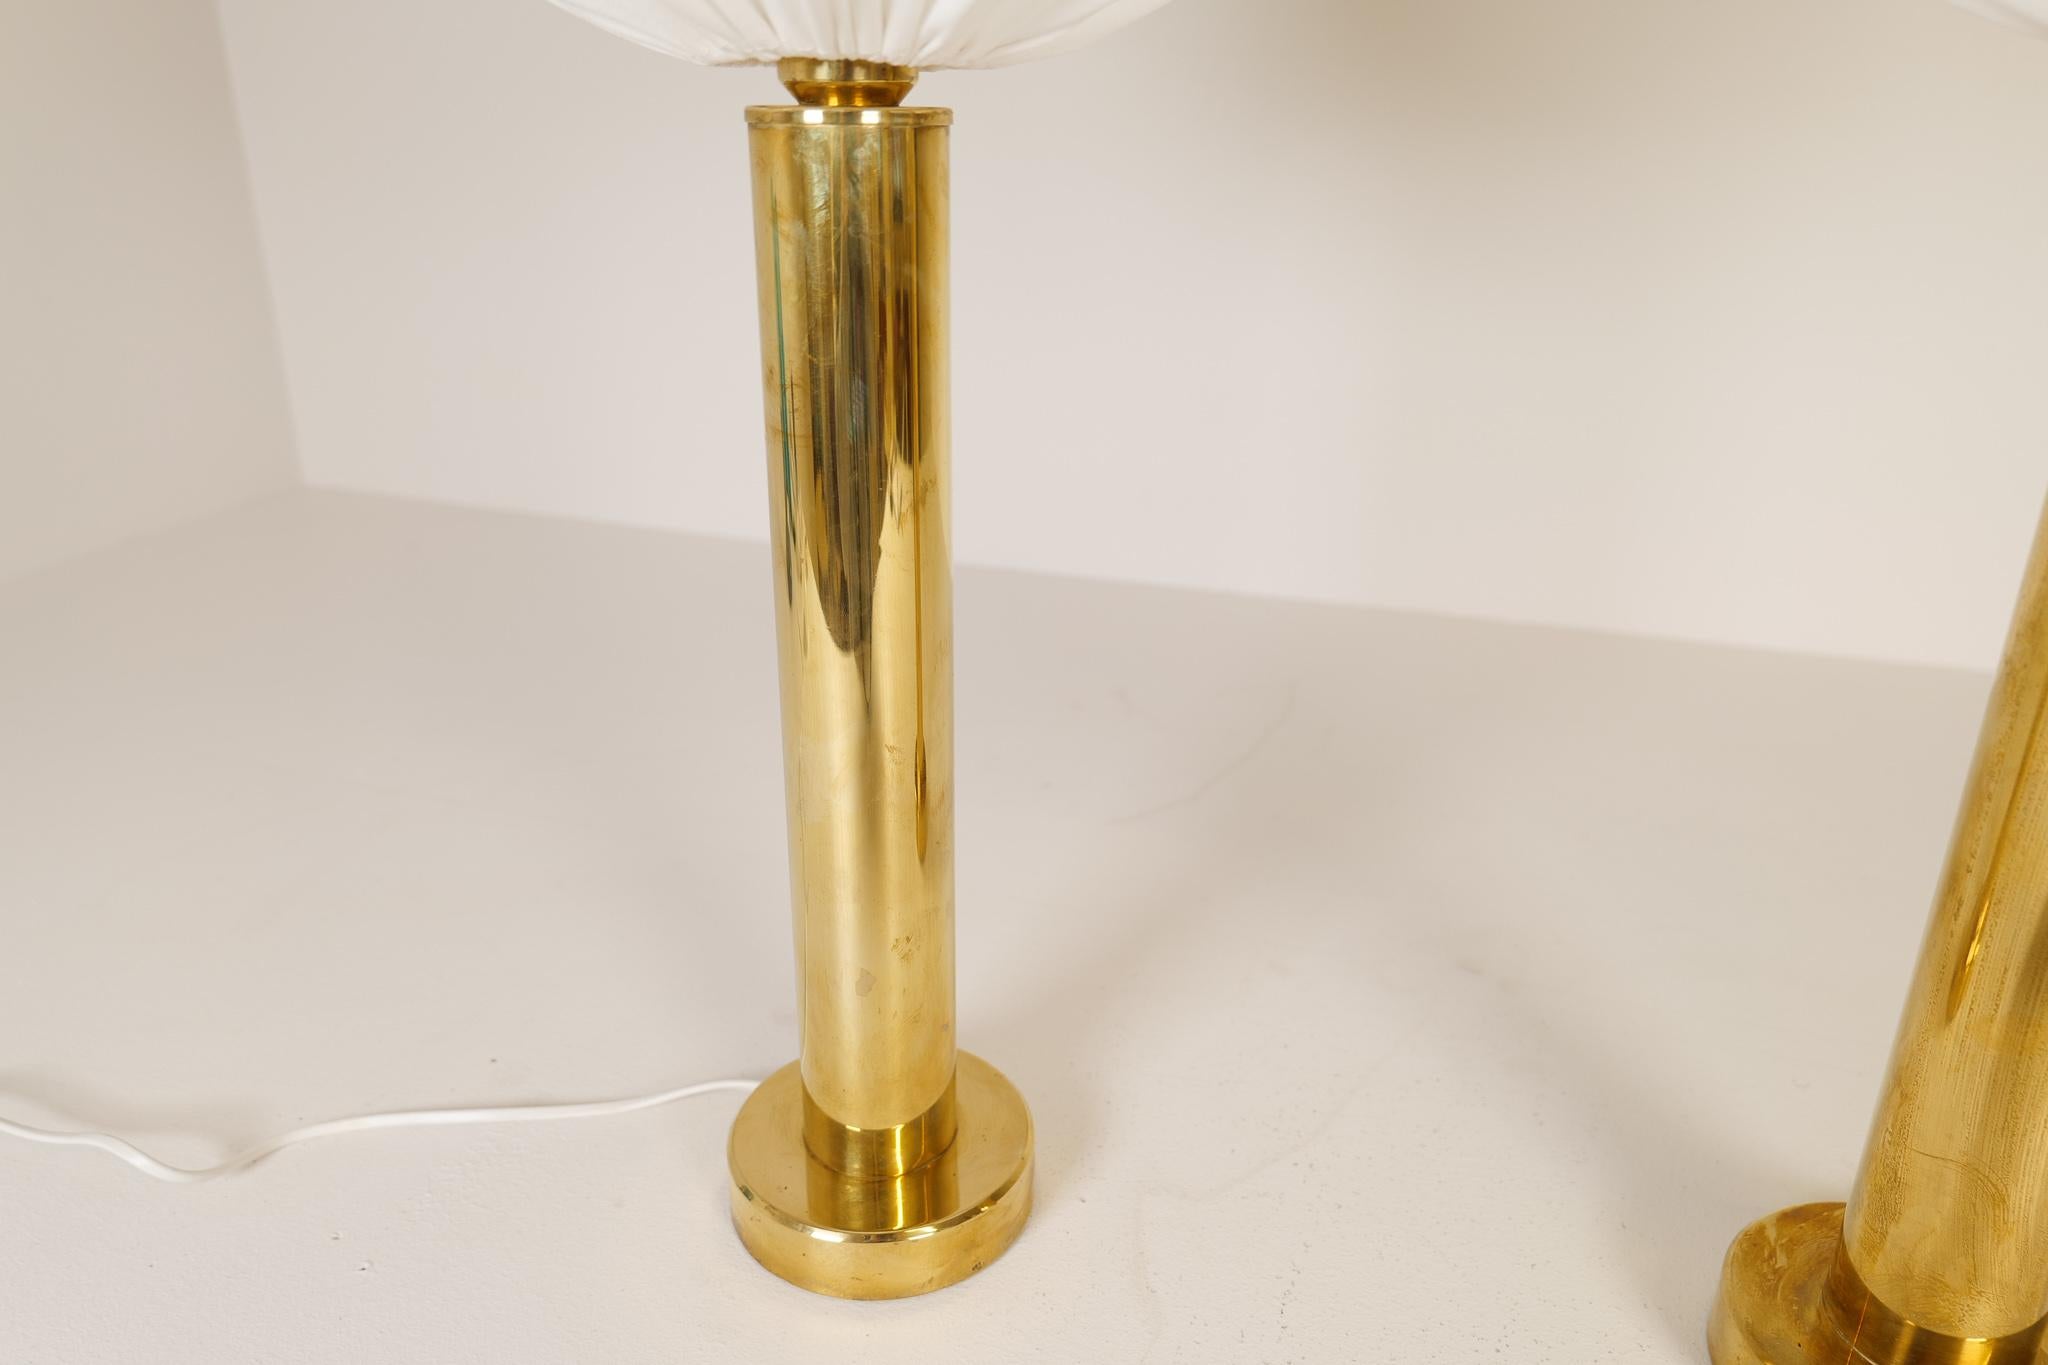 Midcentury Pair of Brass Table Lamps by Kosta Elarmatur, Sweden, 1960s For Sale 2